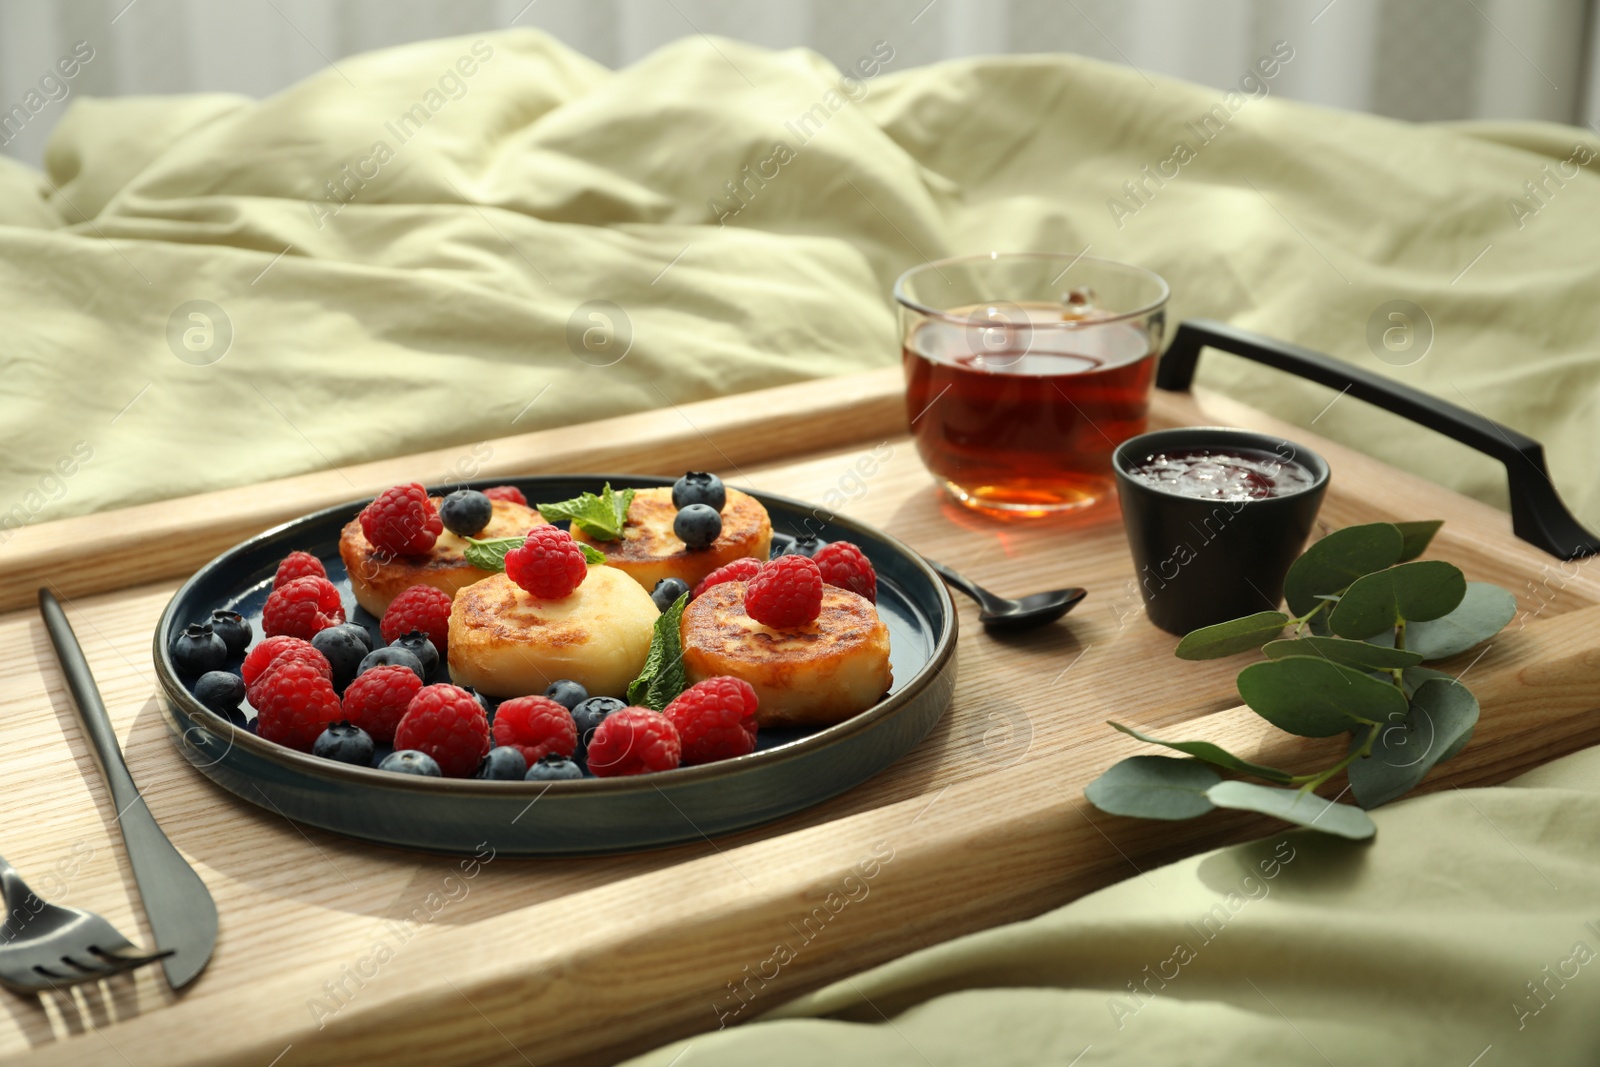 Photo of Tasty breakfast served in bedroom. Cottage cheese pancakes with fresh berries and mint on wooden tray